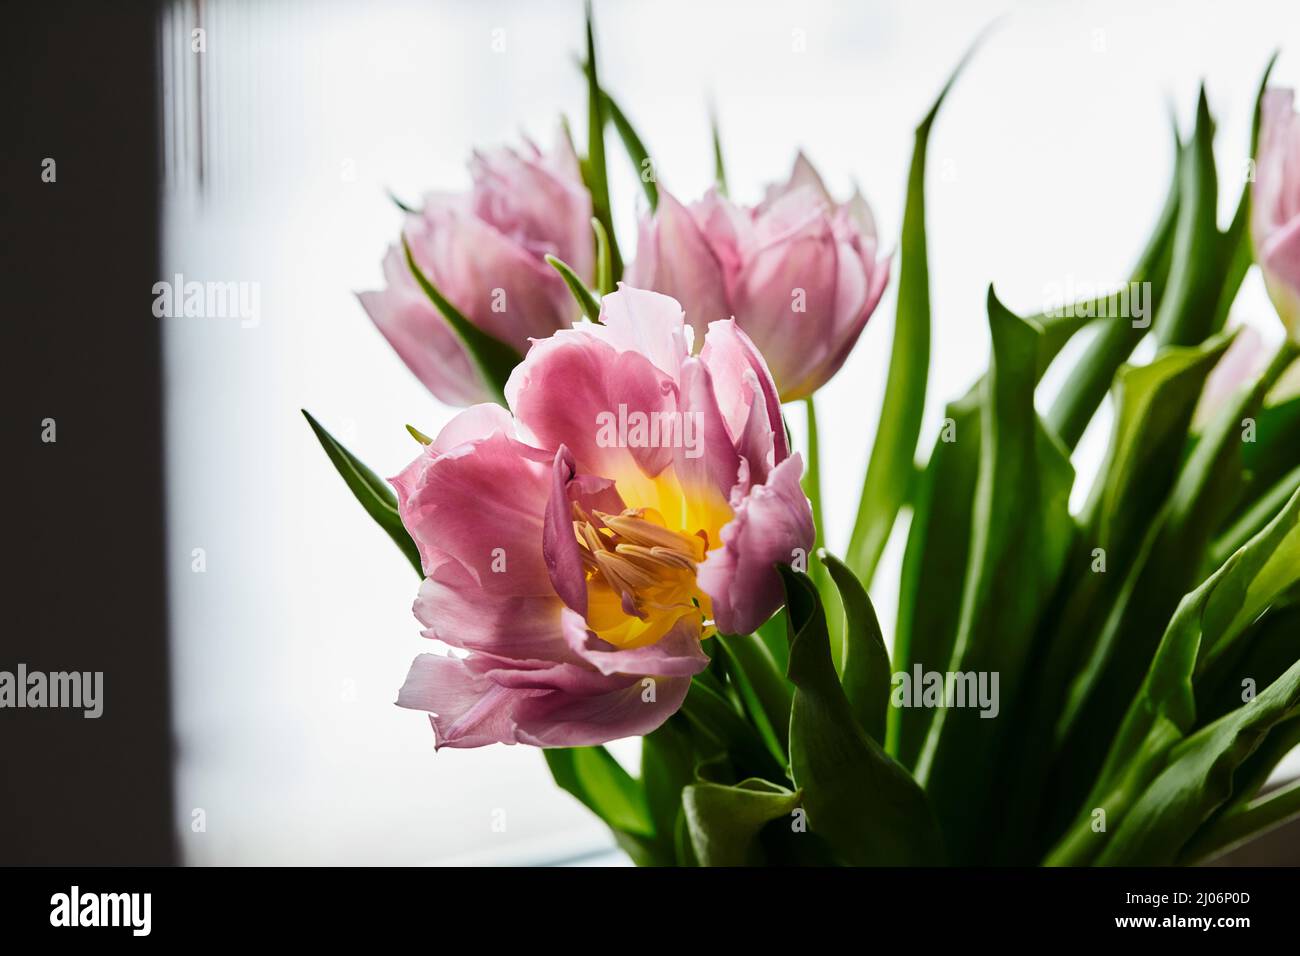 Peony-shaped tulips photo in a bouquet. Macro photo of flowers. Spring and holiday concept, gifts for March 8 international women's day. Front view. Stock Photo